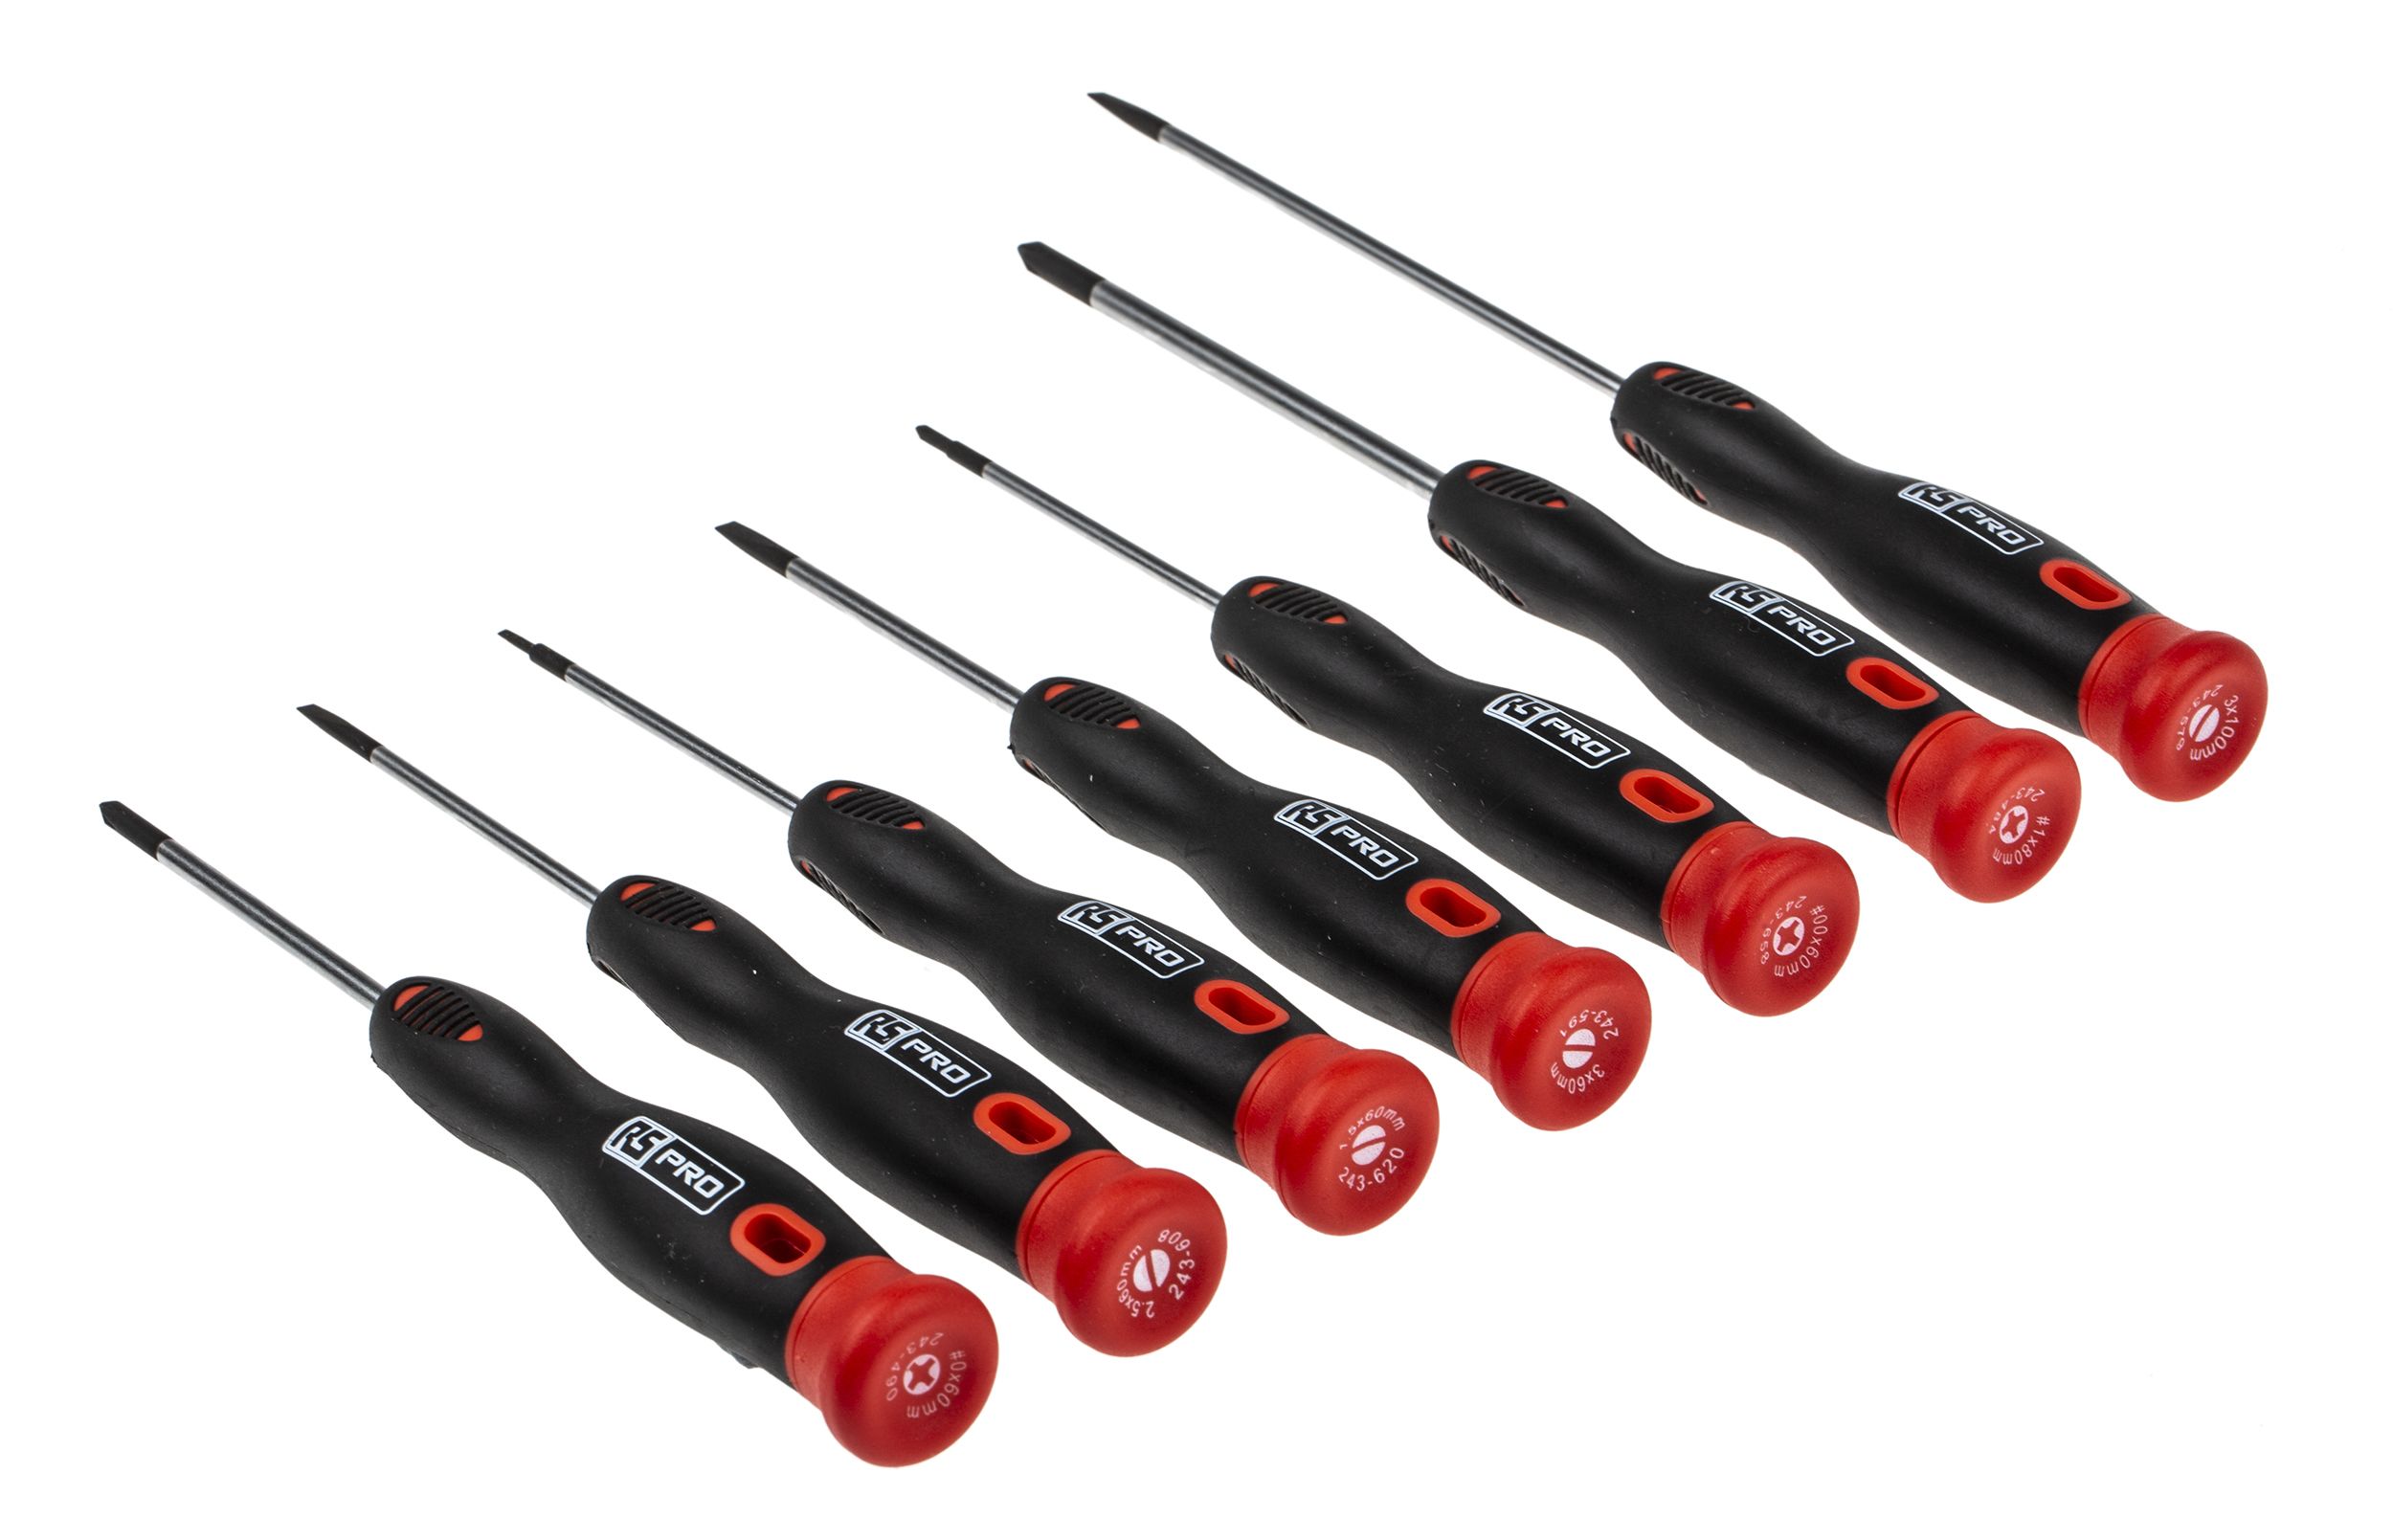 RS PRO Precision Phillips, Slotted Screwdriver Set 7 Piece